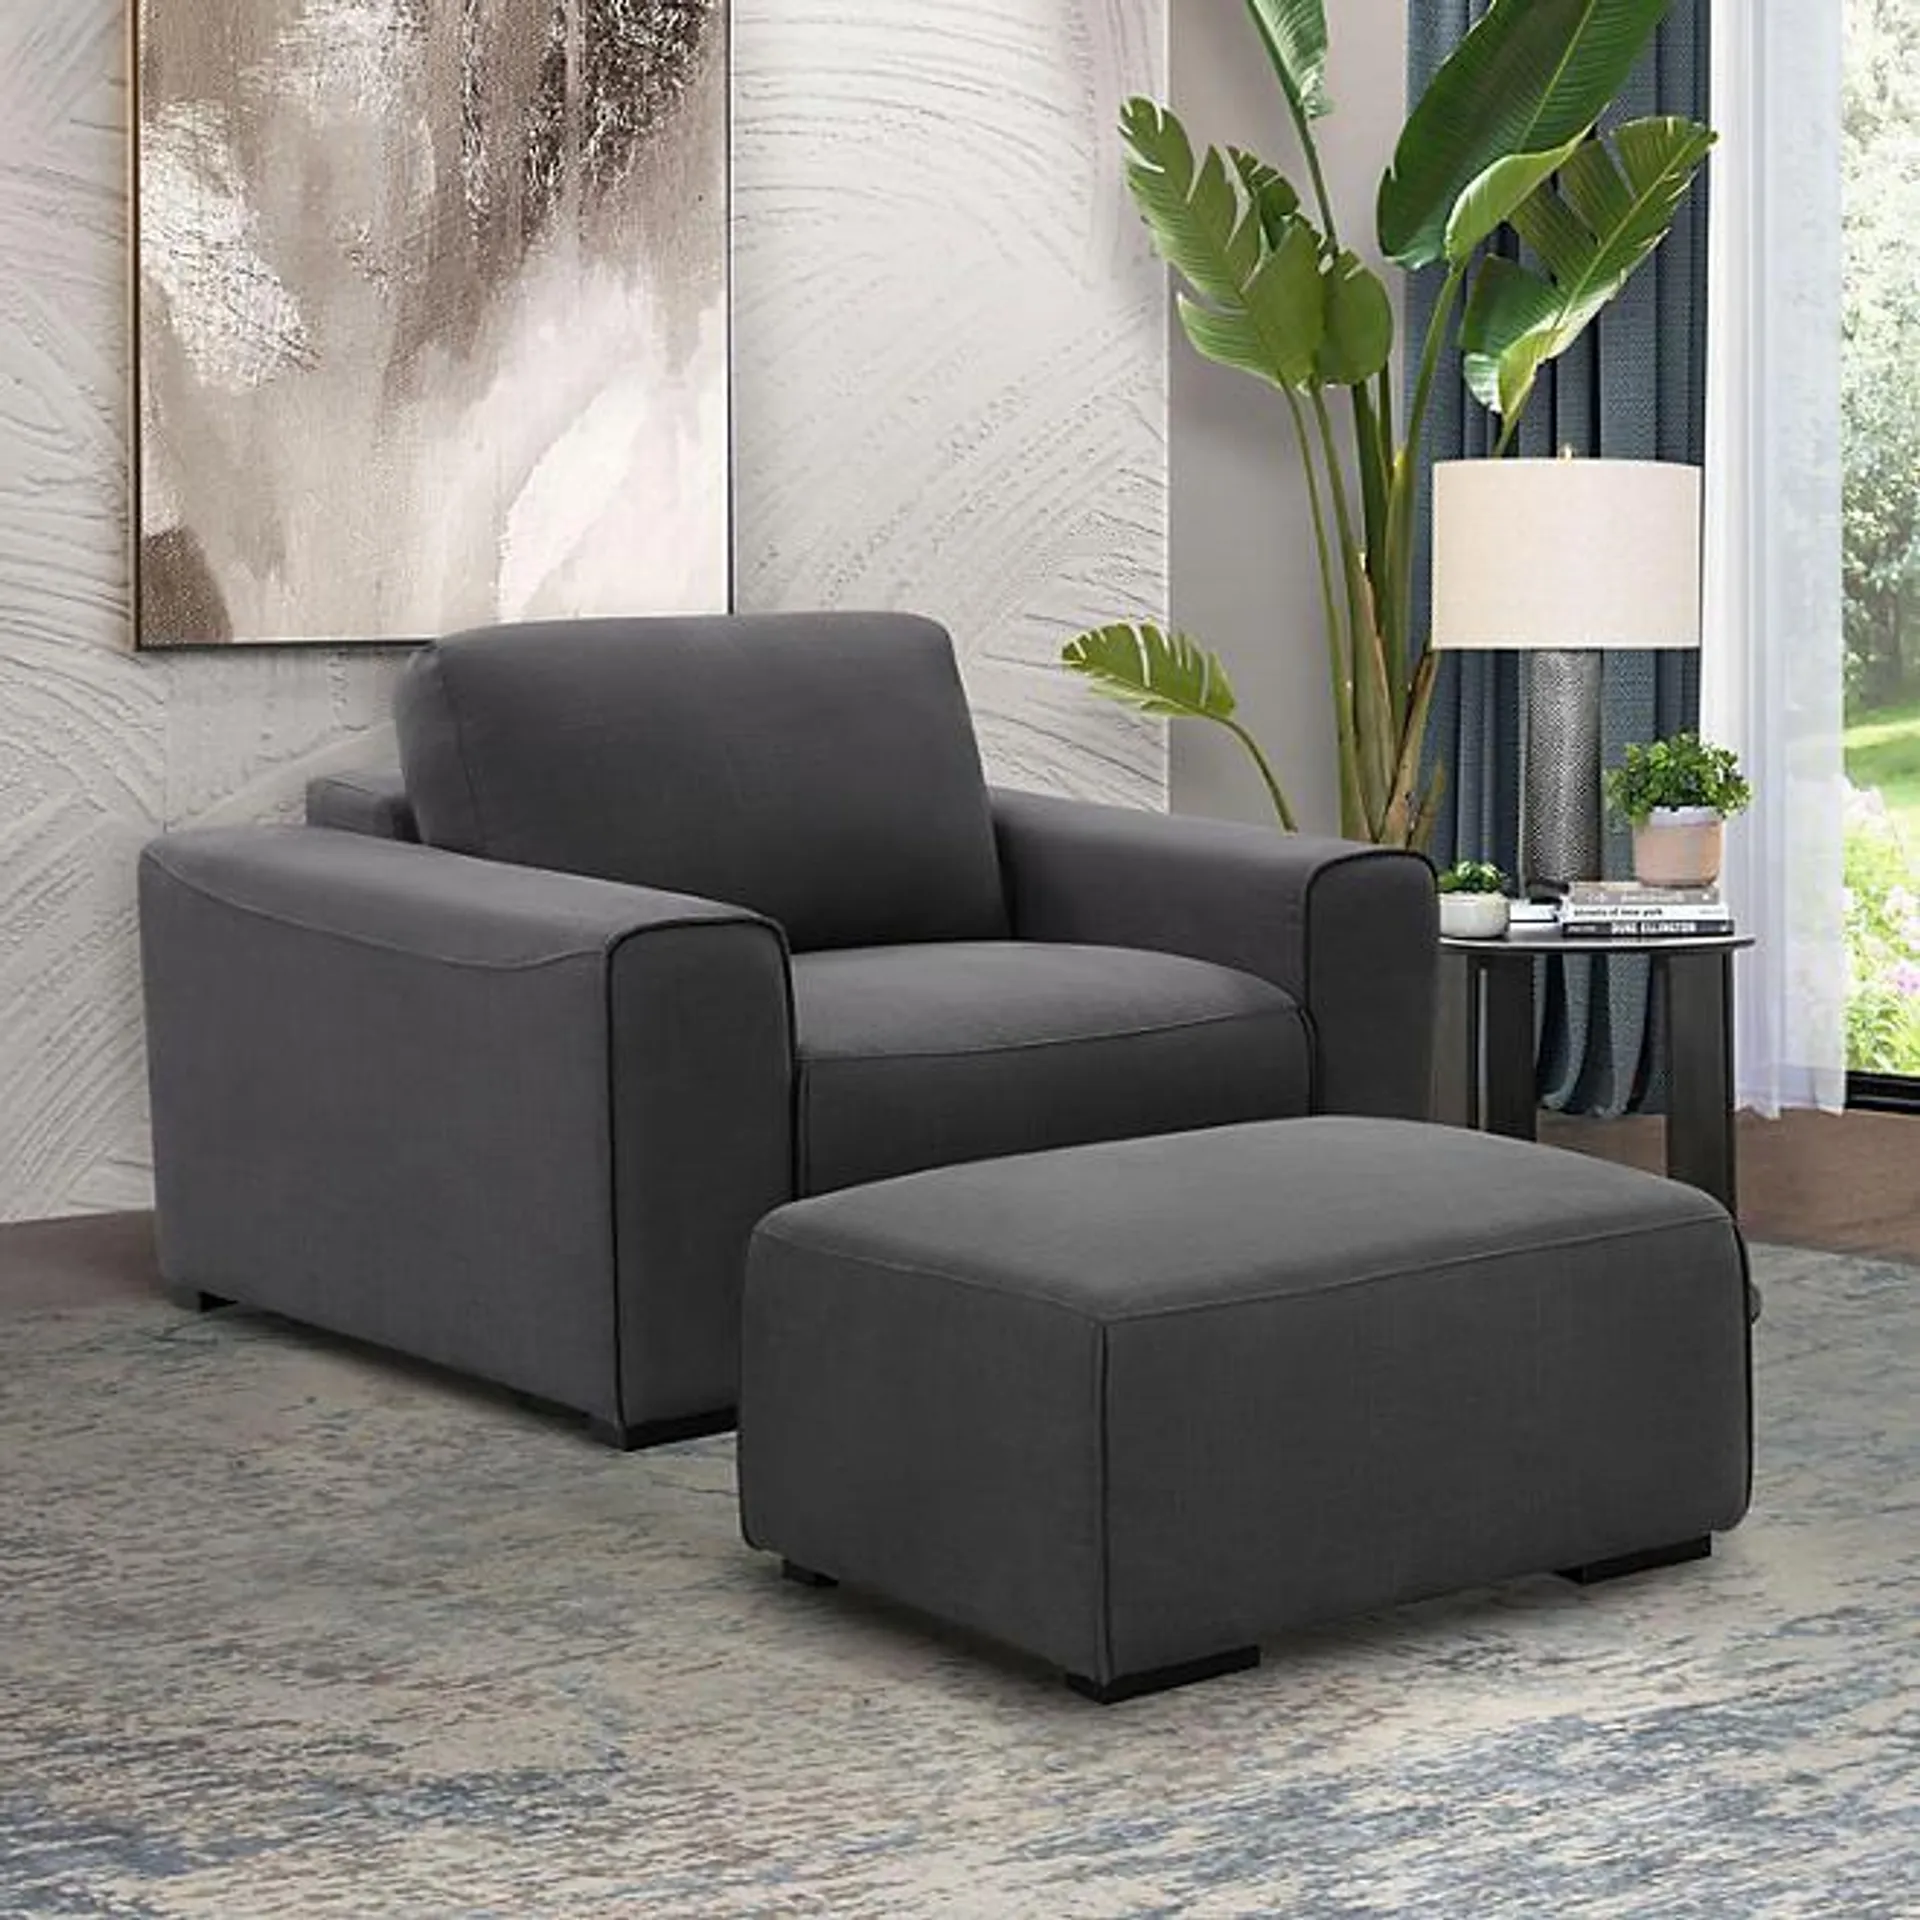 Selina Fabric Chair And Ottoman Collection, Assorted Colors & Set Pieces